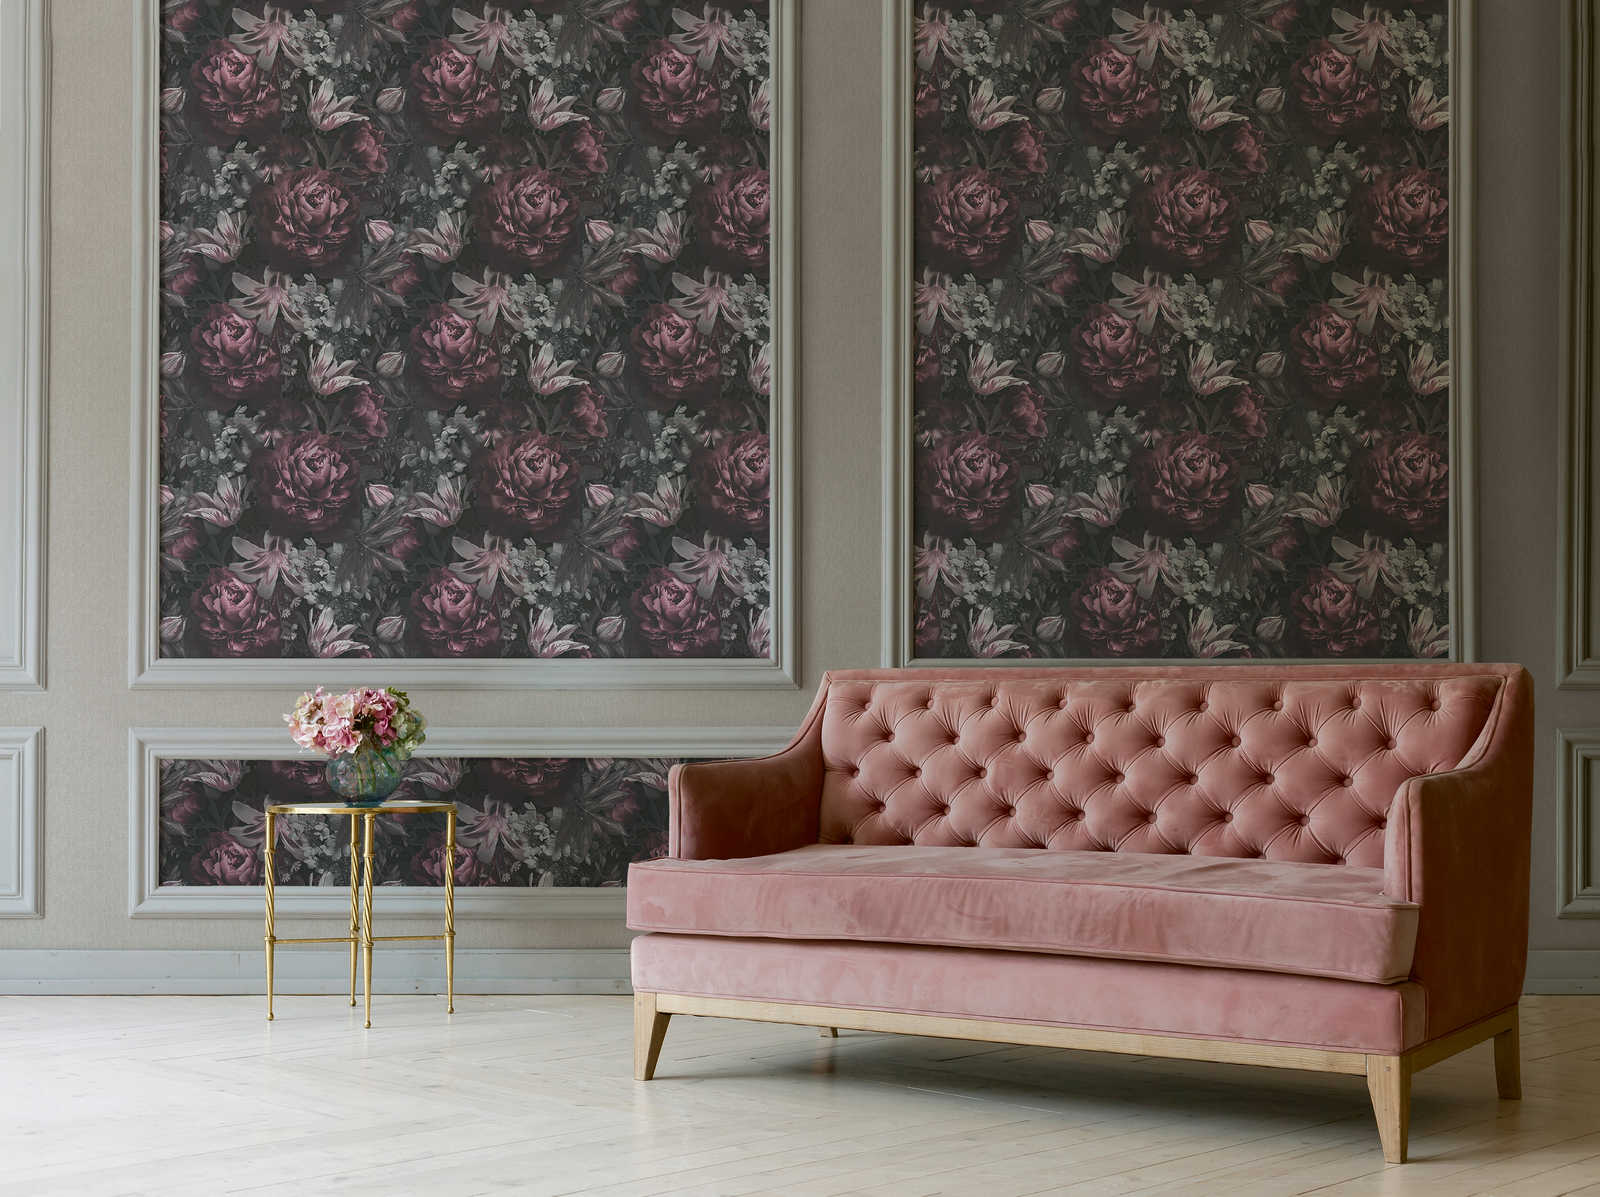             Roses wallpaper flowers in painting style - grey, pink, green
        